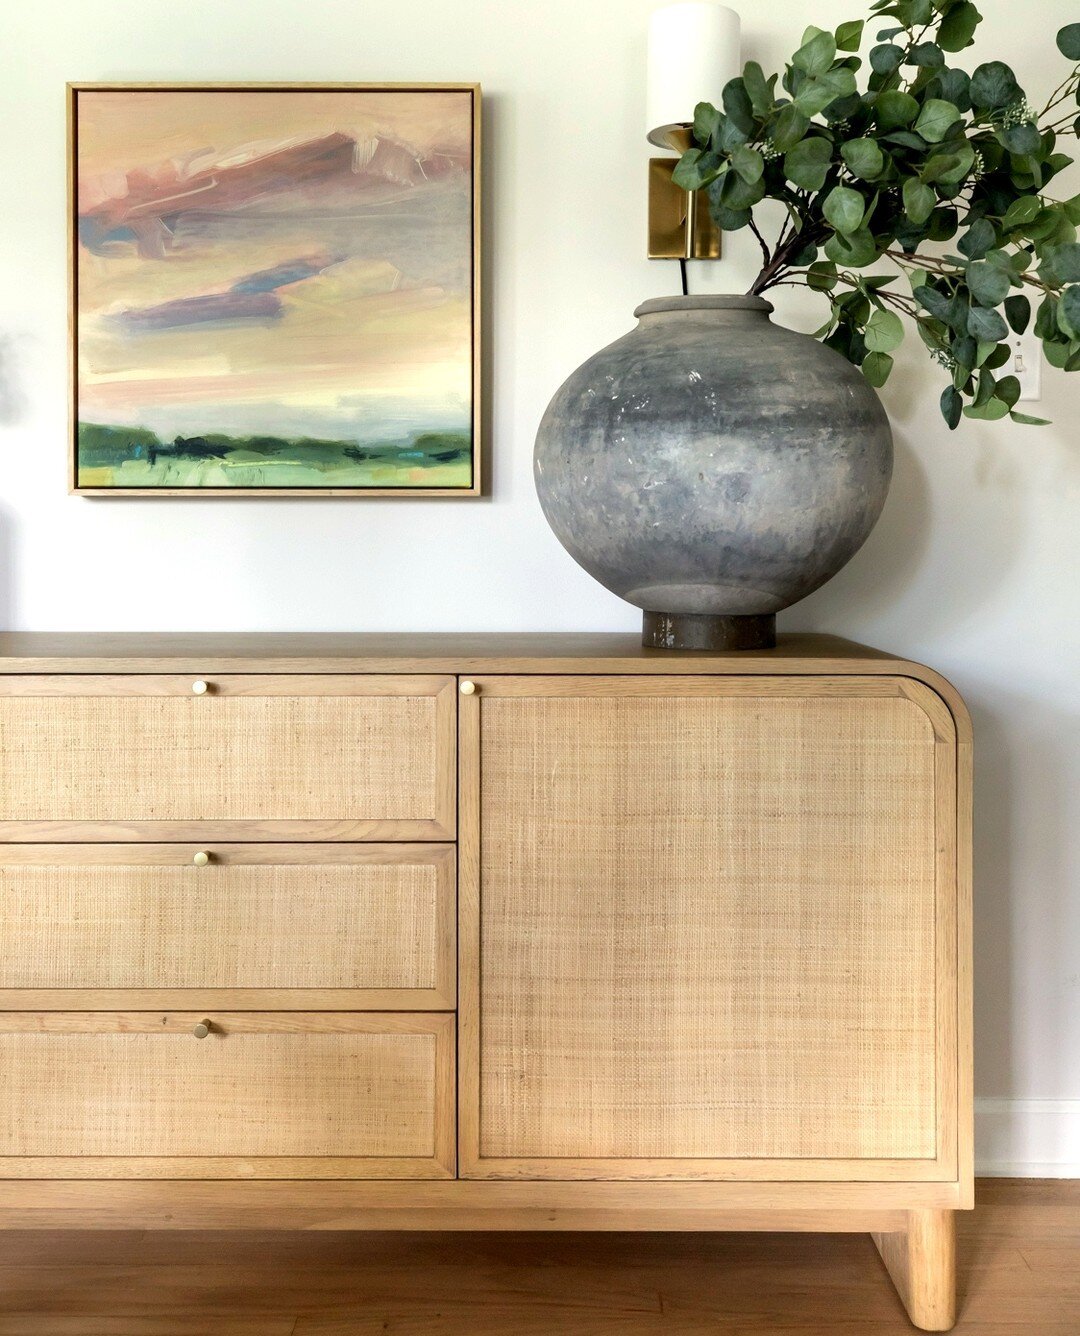 When there isn't enough storage in a kitchen - we find a gorgeous solution - and this sideboard gets to be the unsung hero. Pair it with artwork, sconces and a vintage one-of-a-kind vase and BAM we have a showstopper moment. ⁠
⁠
⁠
⁠
⁠
#homestyling #i